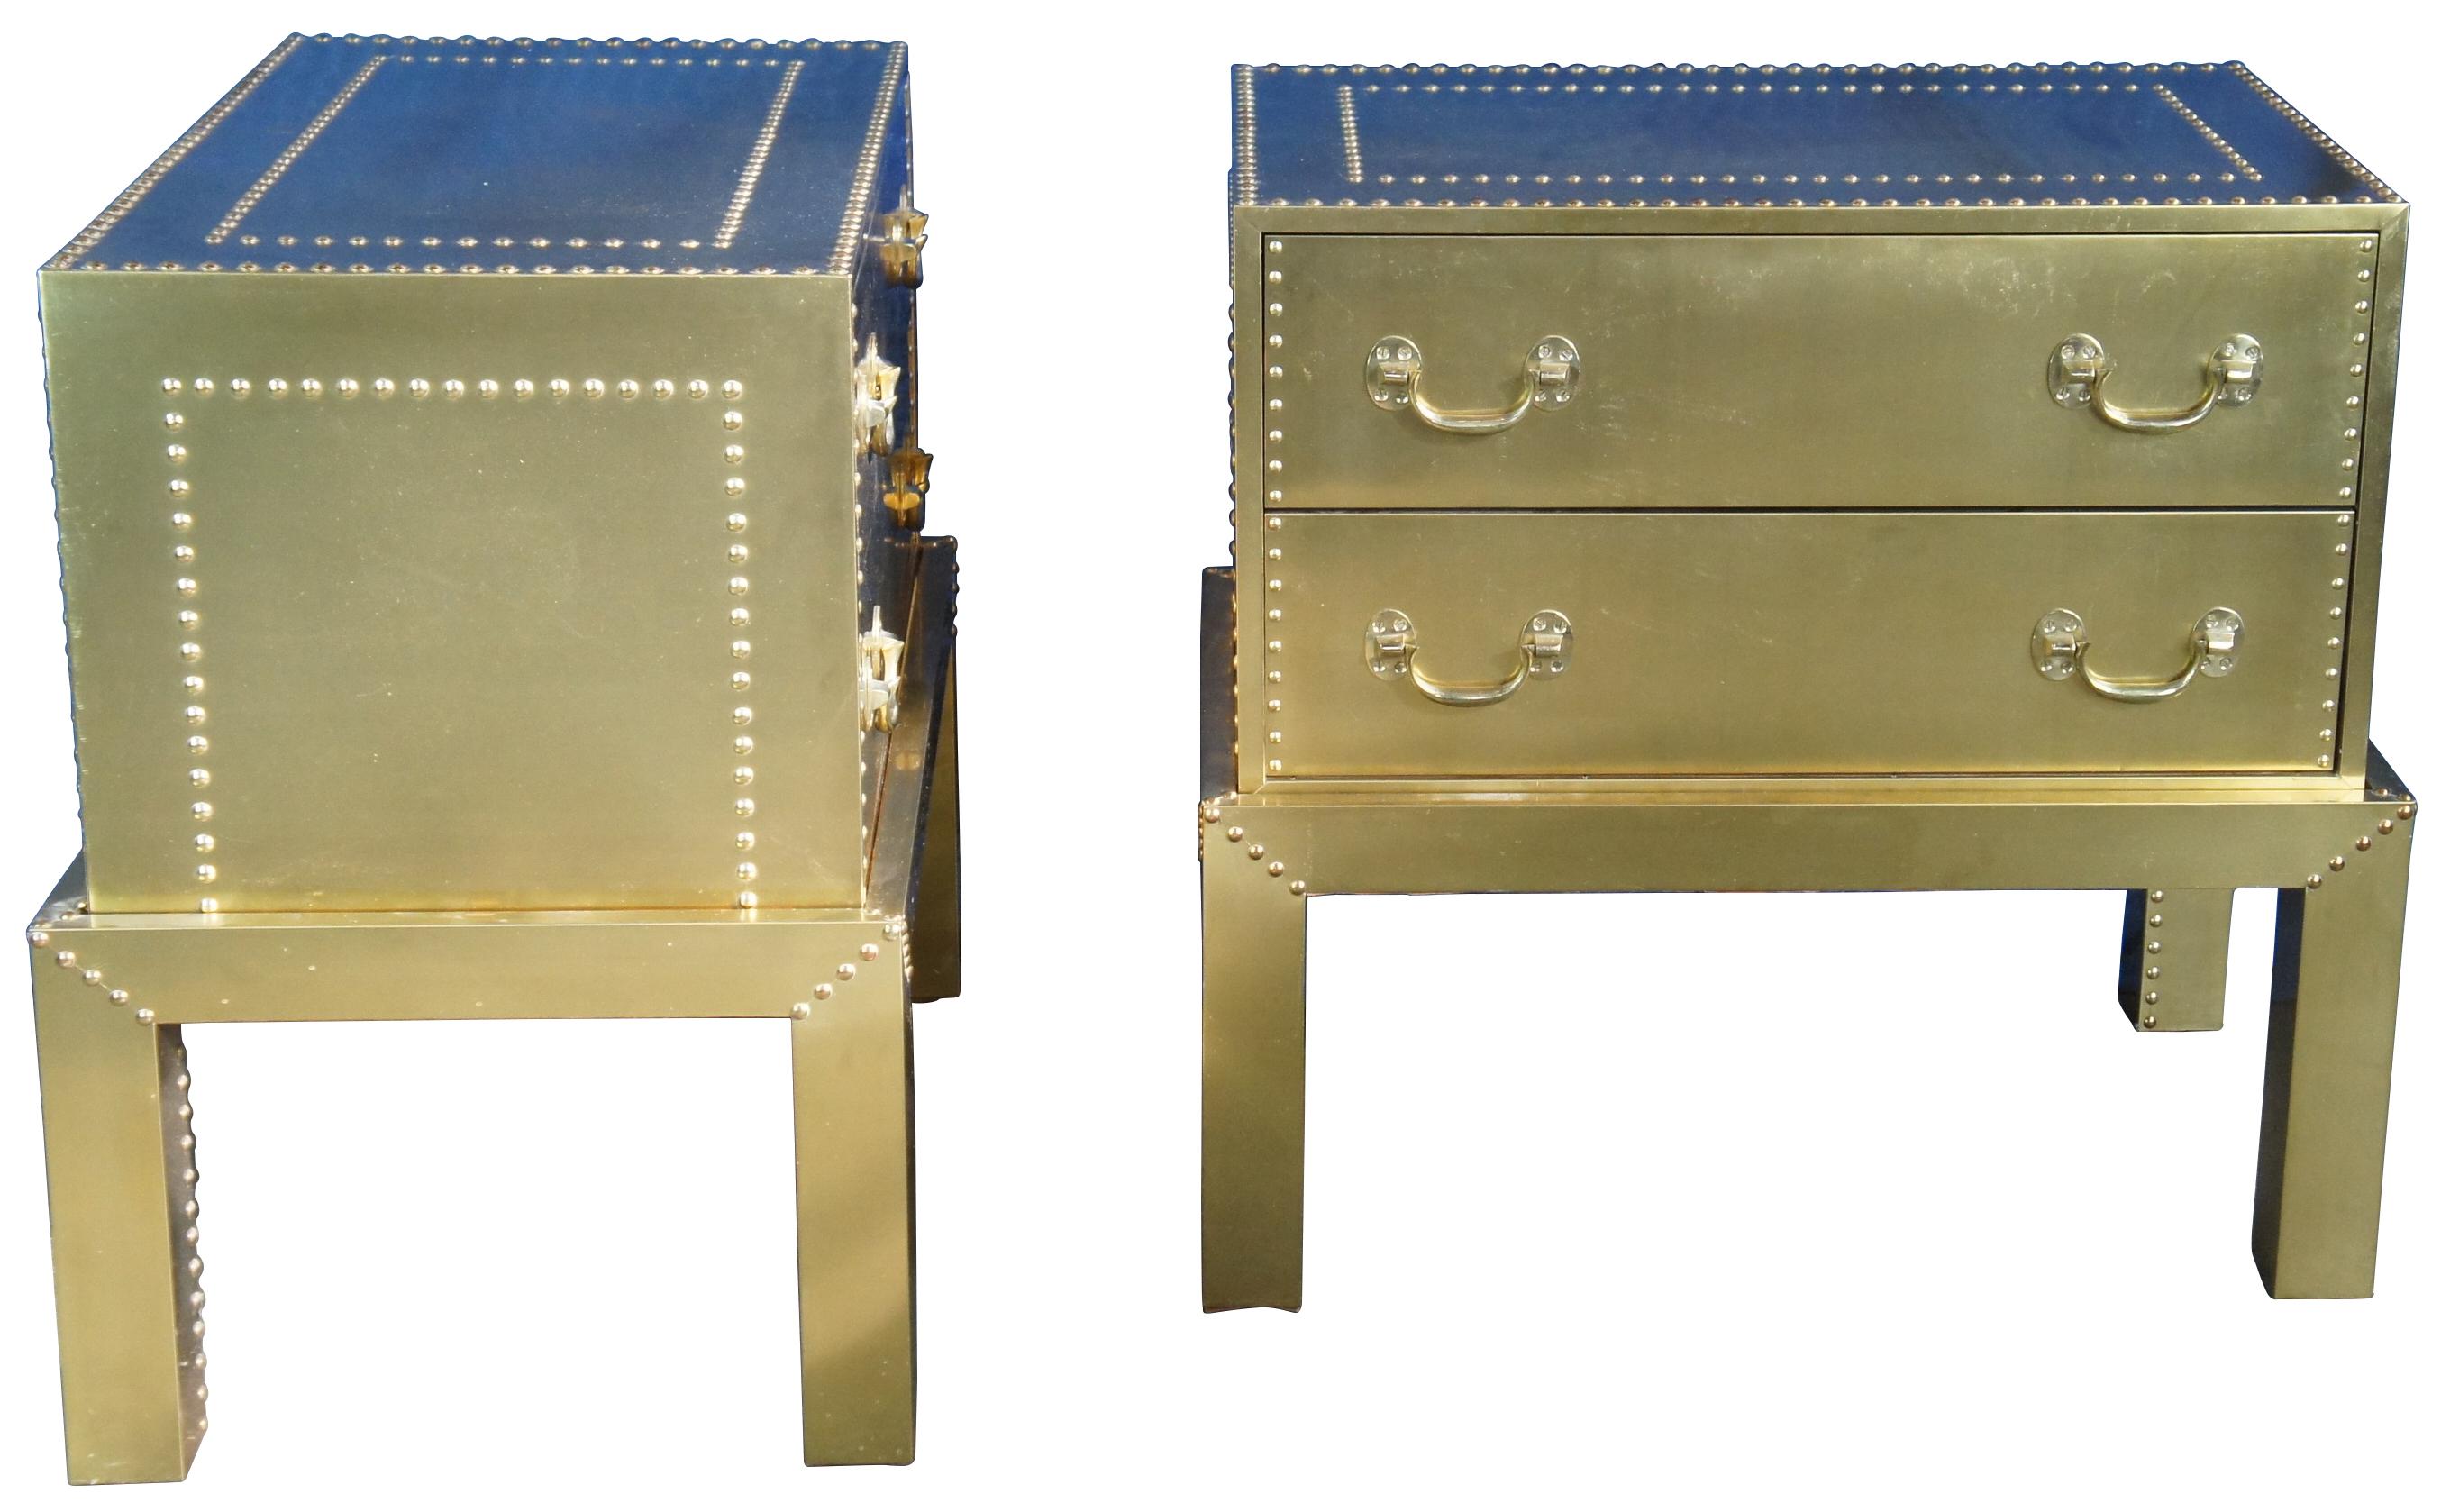 Pair of mid century Spanish chests of drawers on stand, nightstands or side tables. Wrapped in brass featuring nailhead trim. Marked Espana, A Decorative Craft, Hand Made in Spain, 3910. Attributed to Sarreid Ltd. circa 1970s

Provenance : Jerome